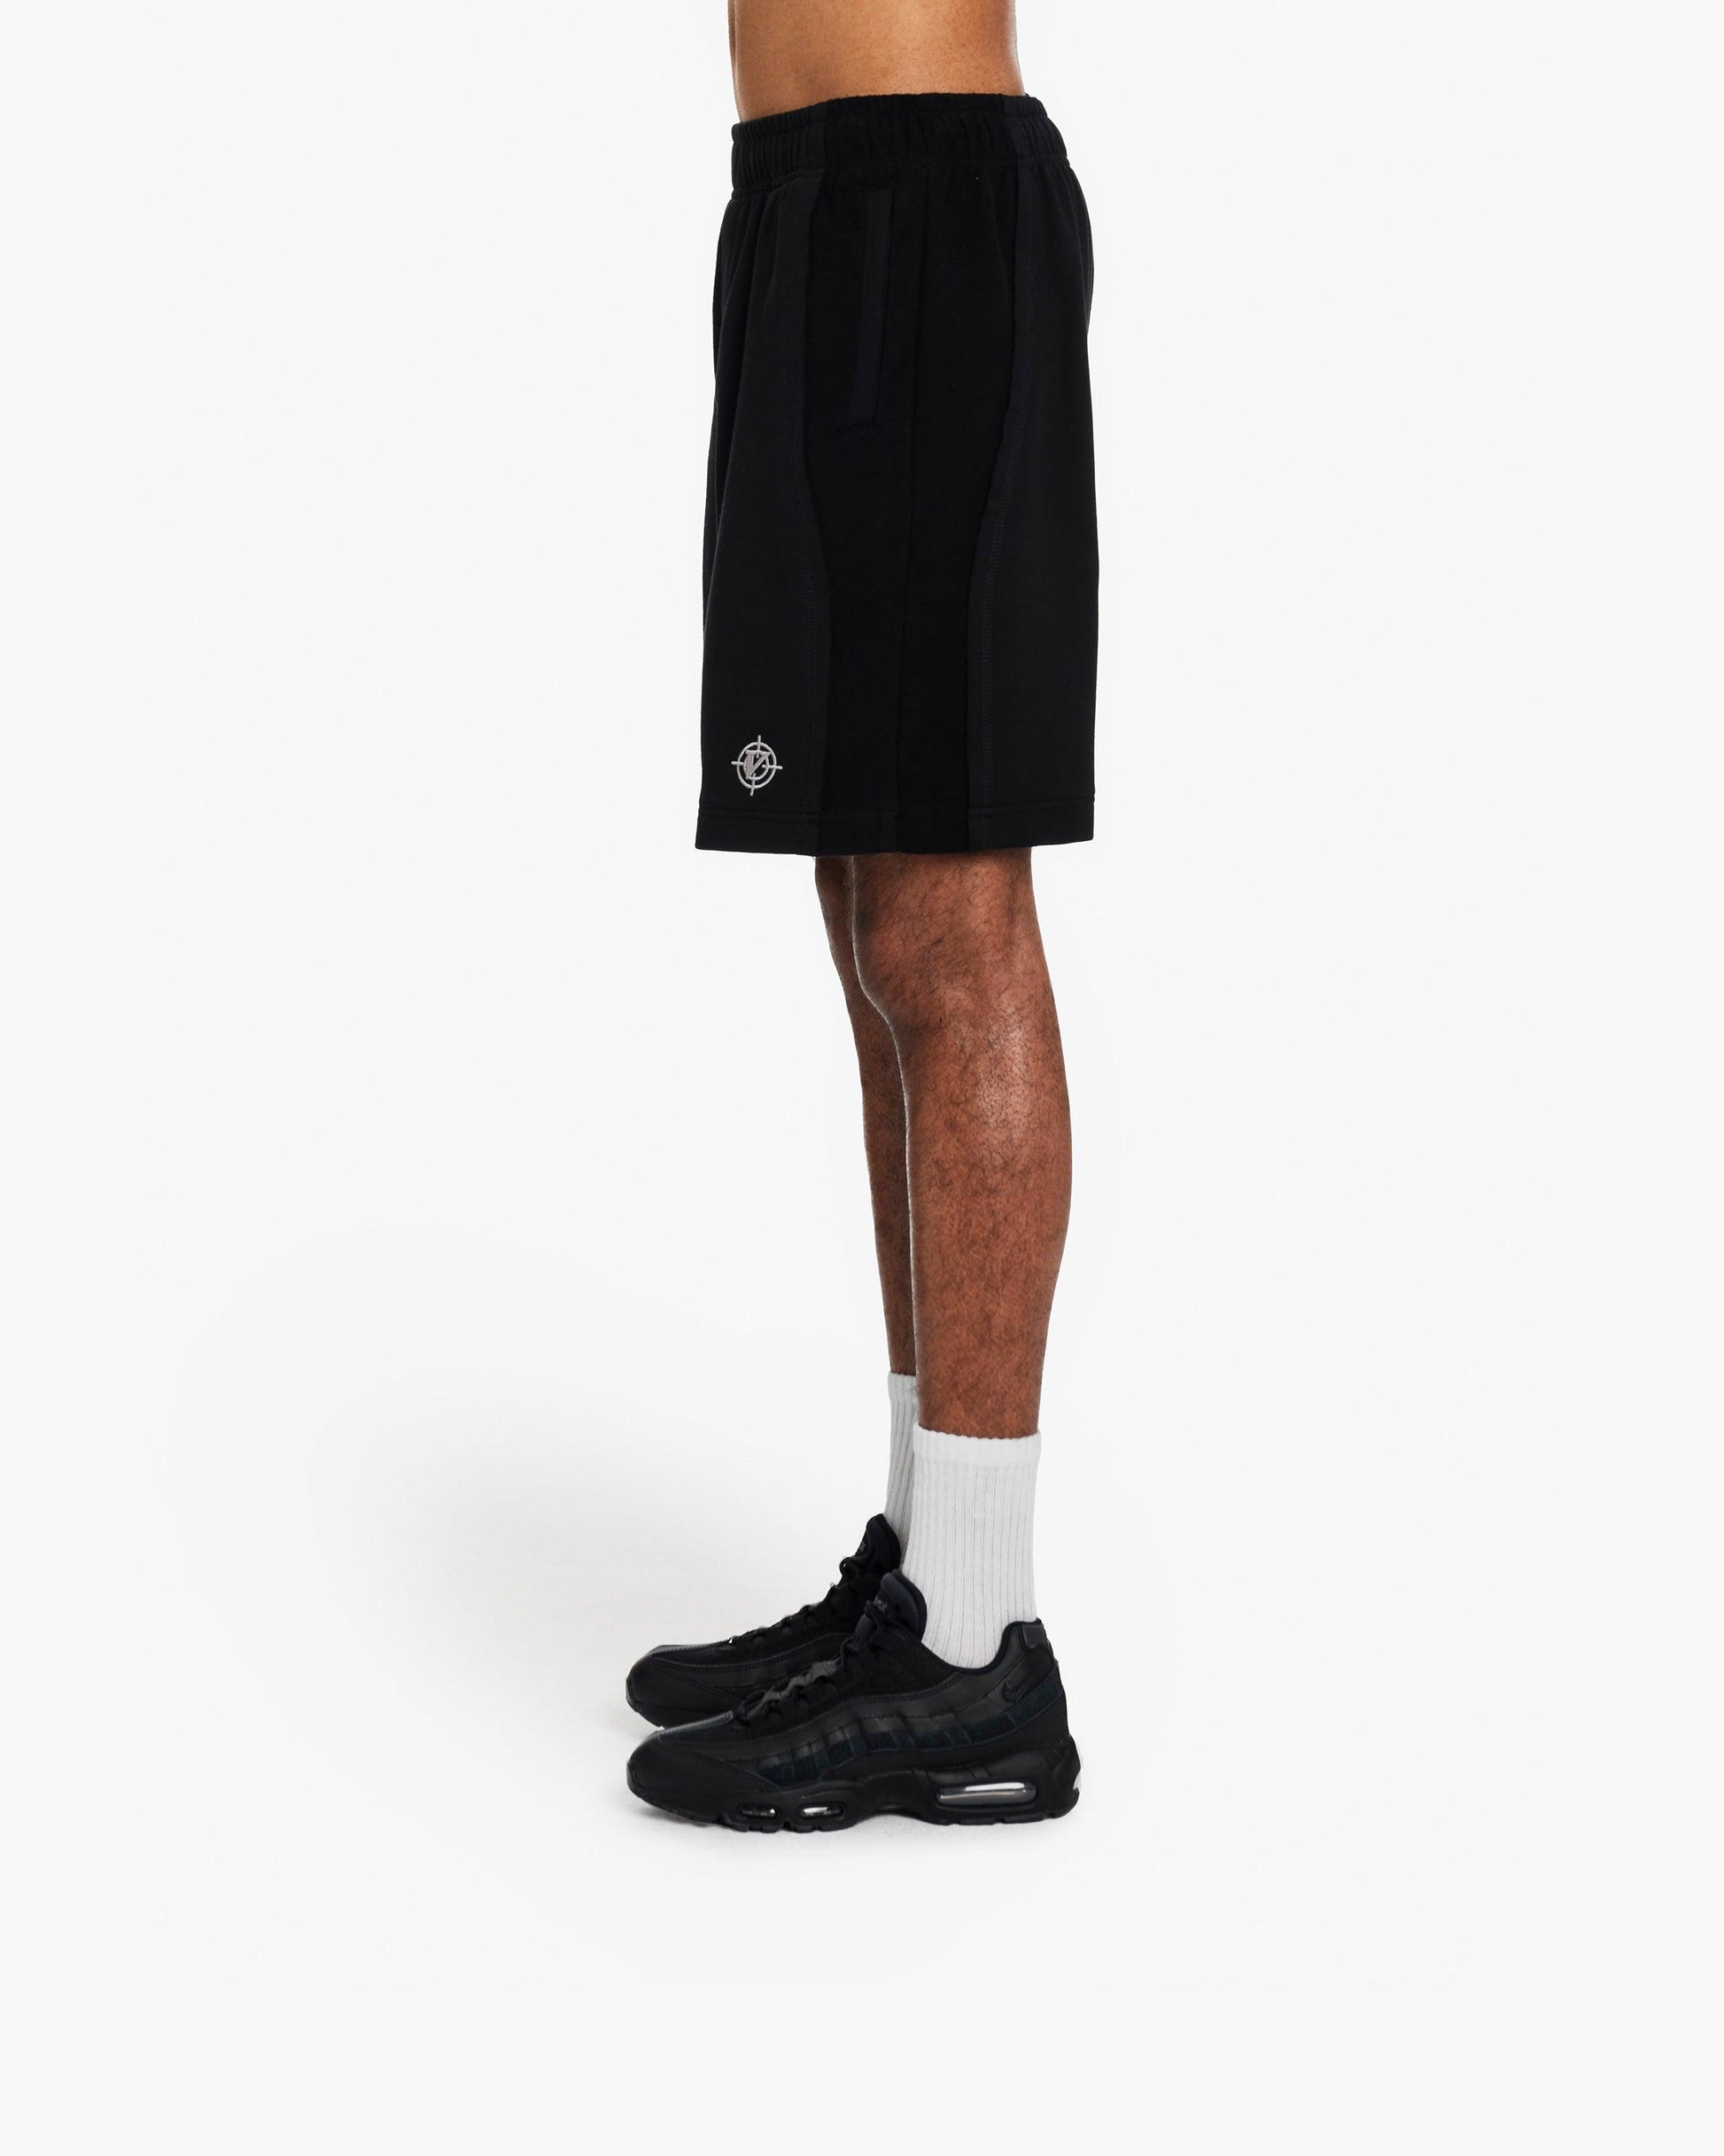 INSIDE OUT SHORTS BLACK - VICINITY